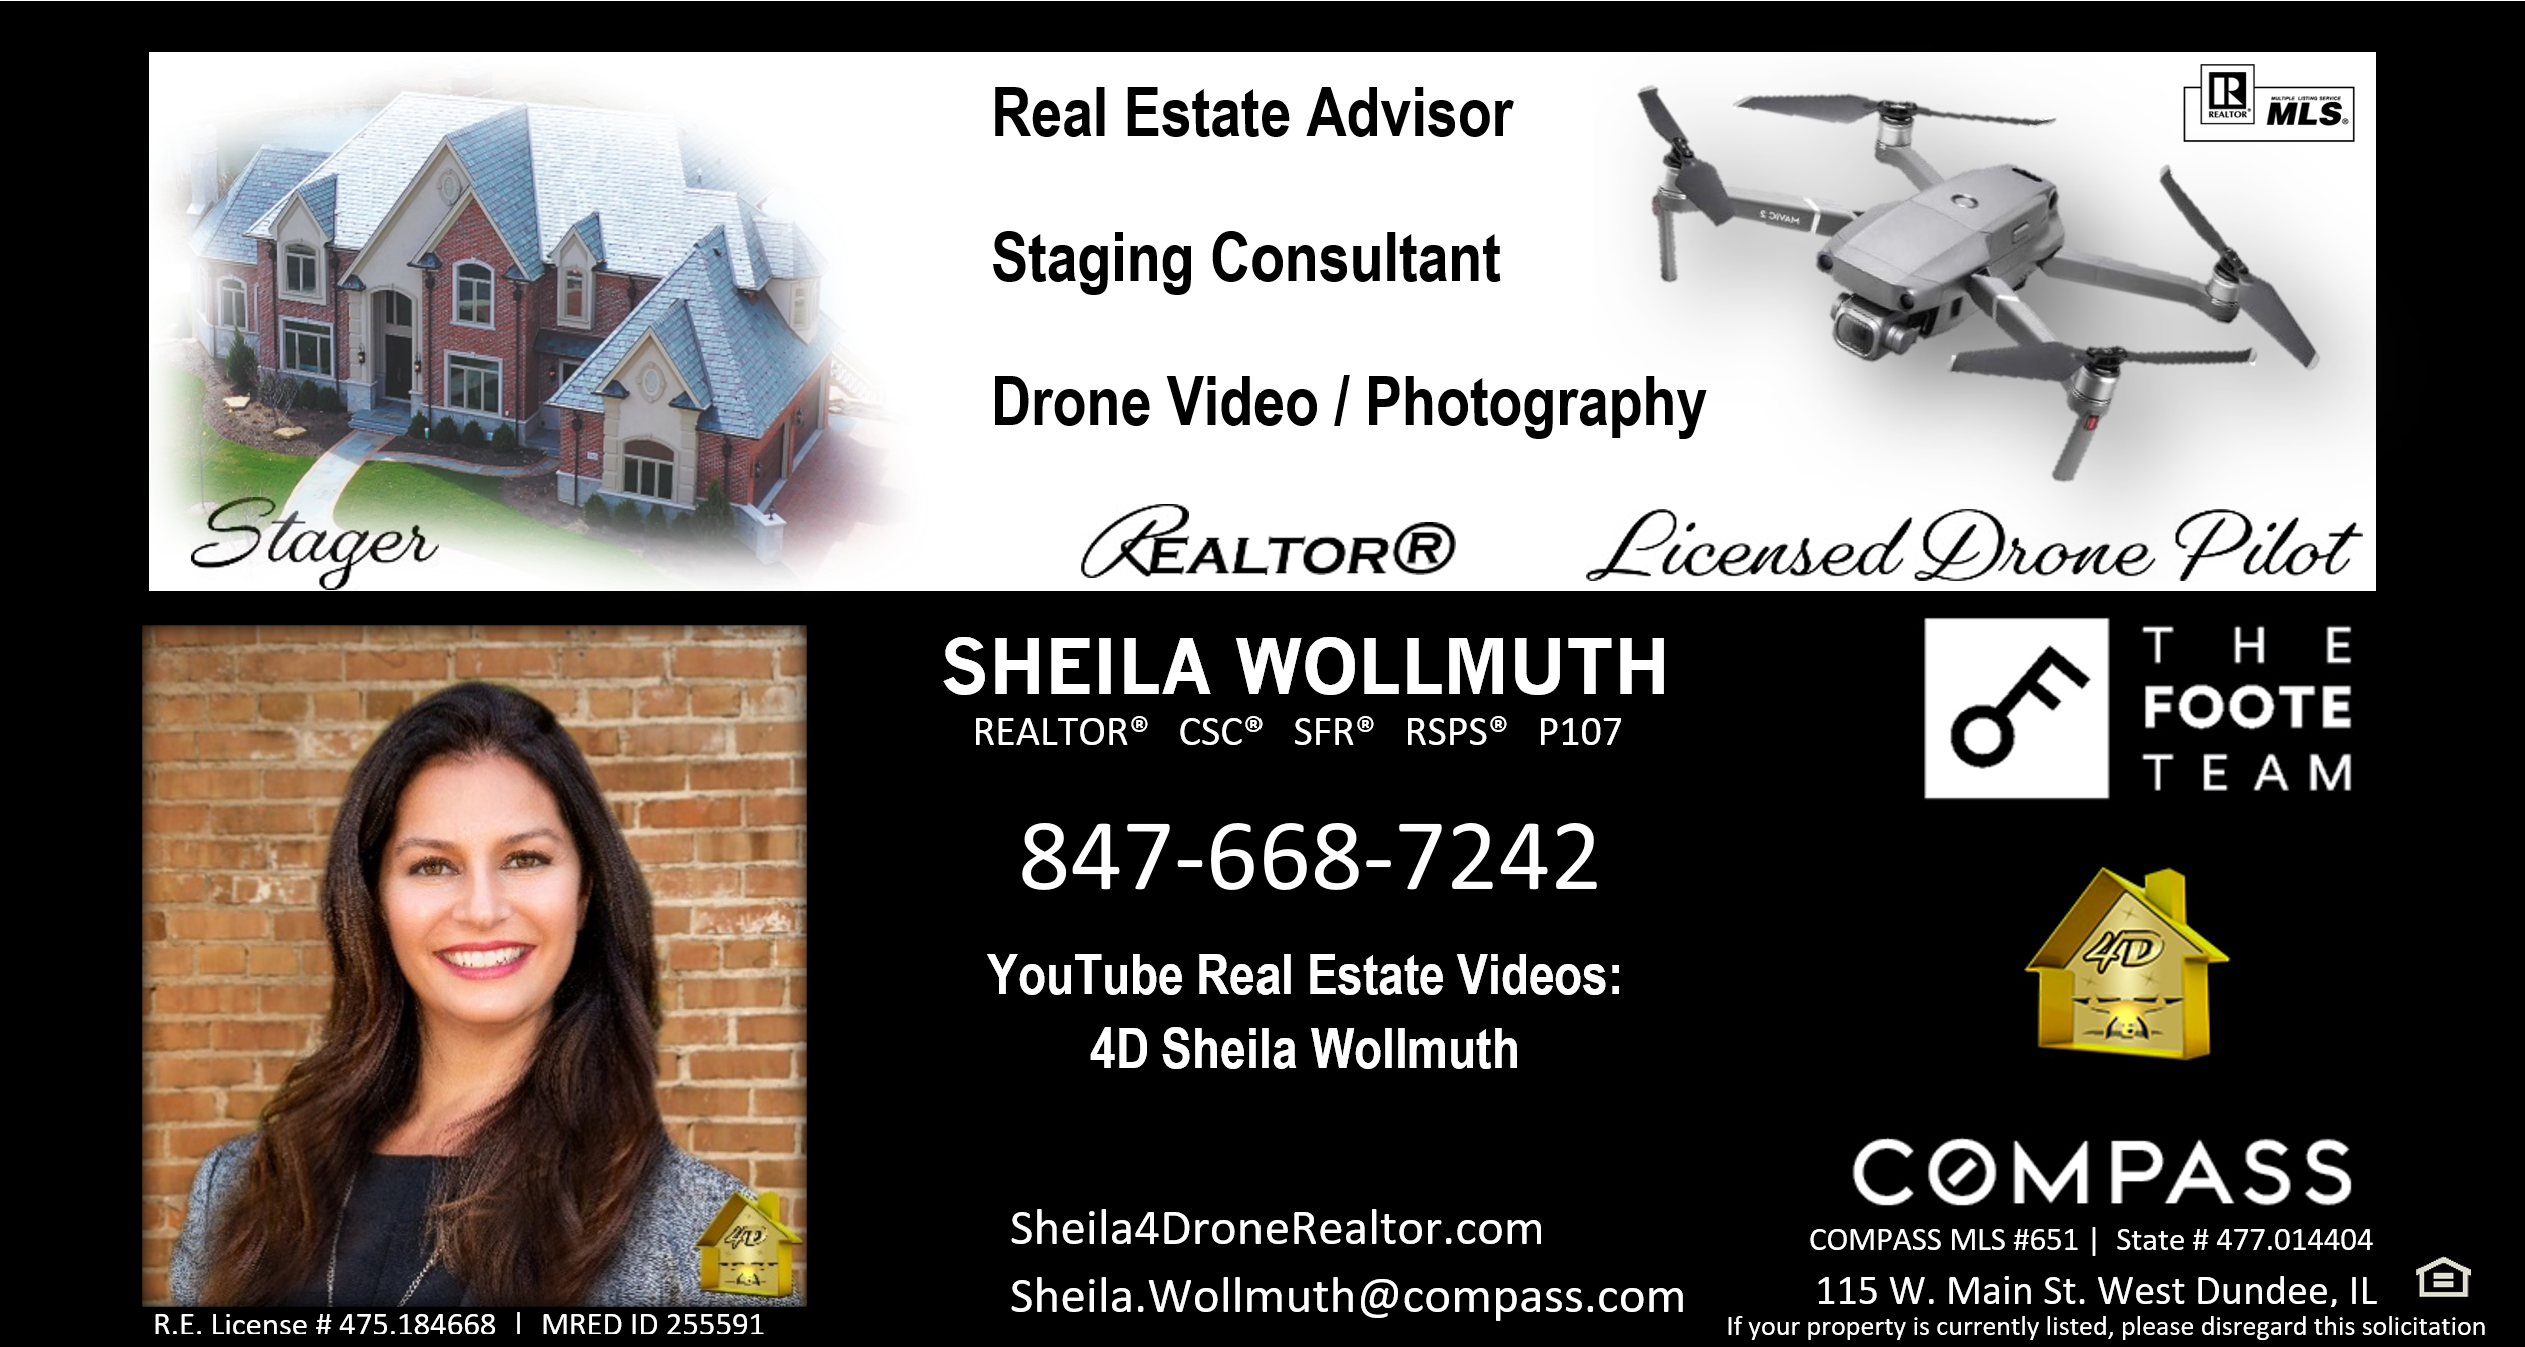 A text banner advertising a real estate advisor and photography services.